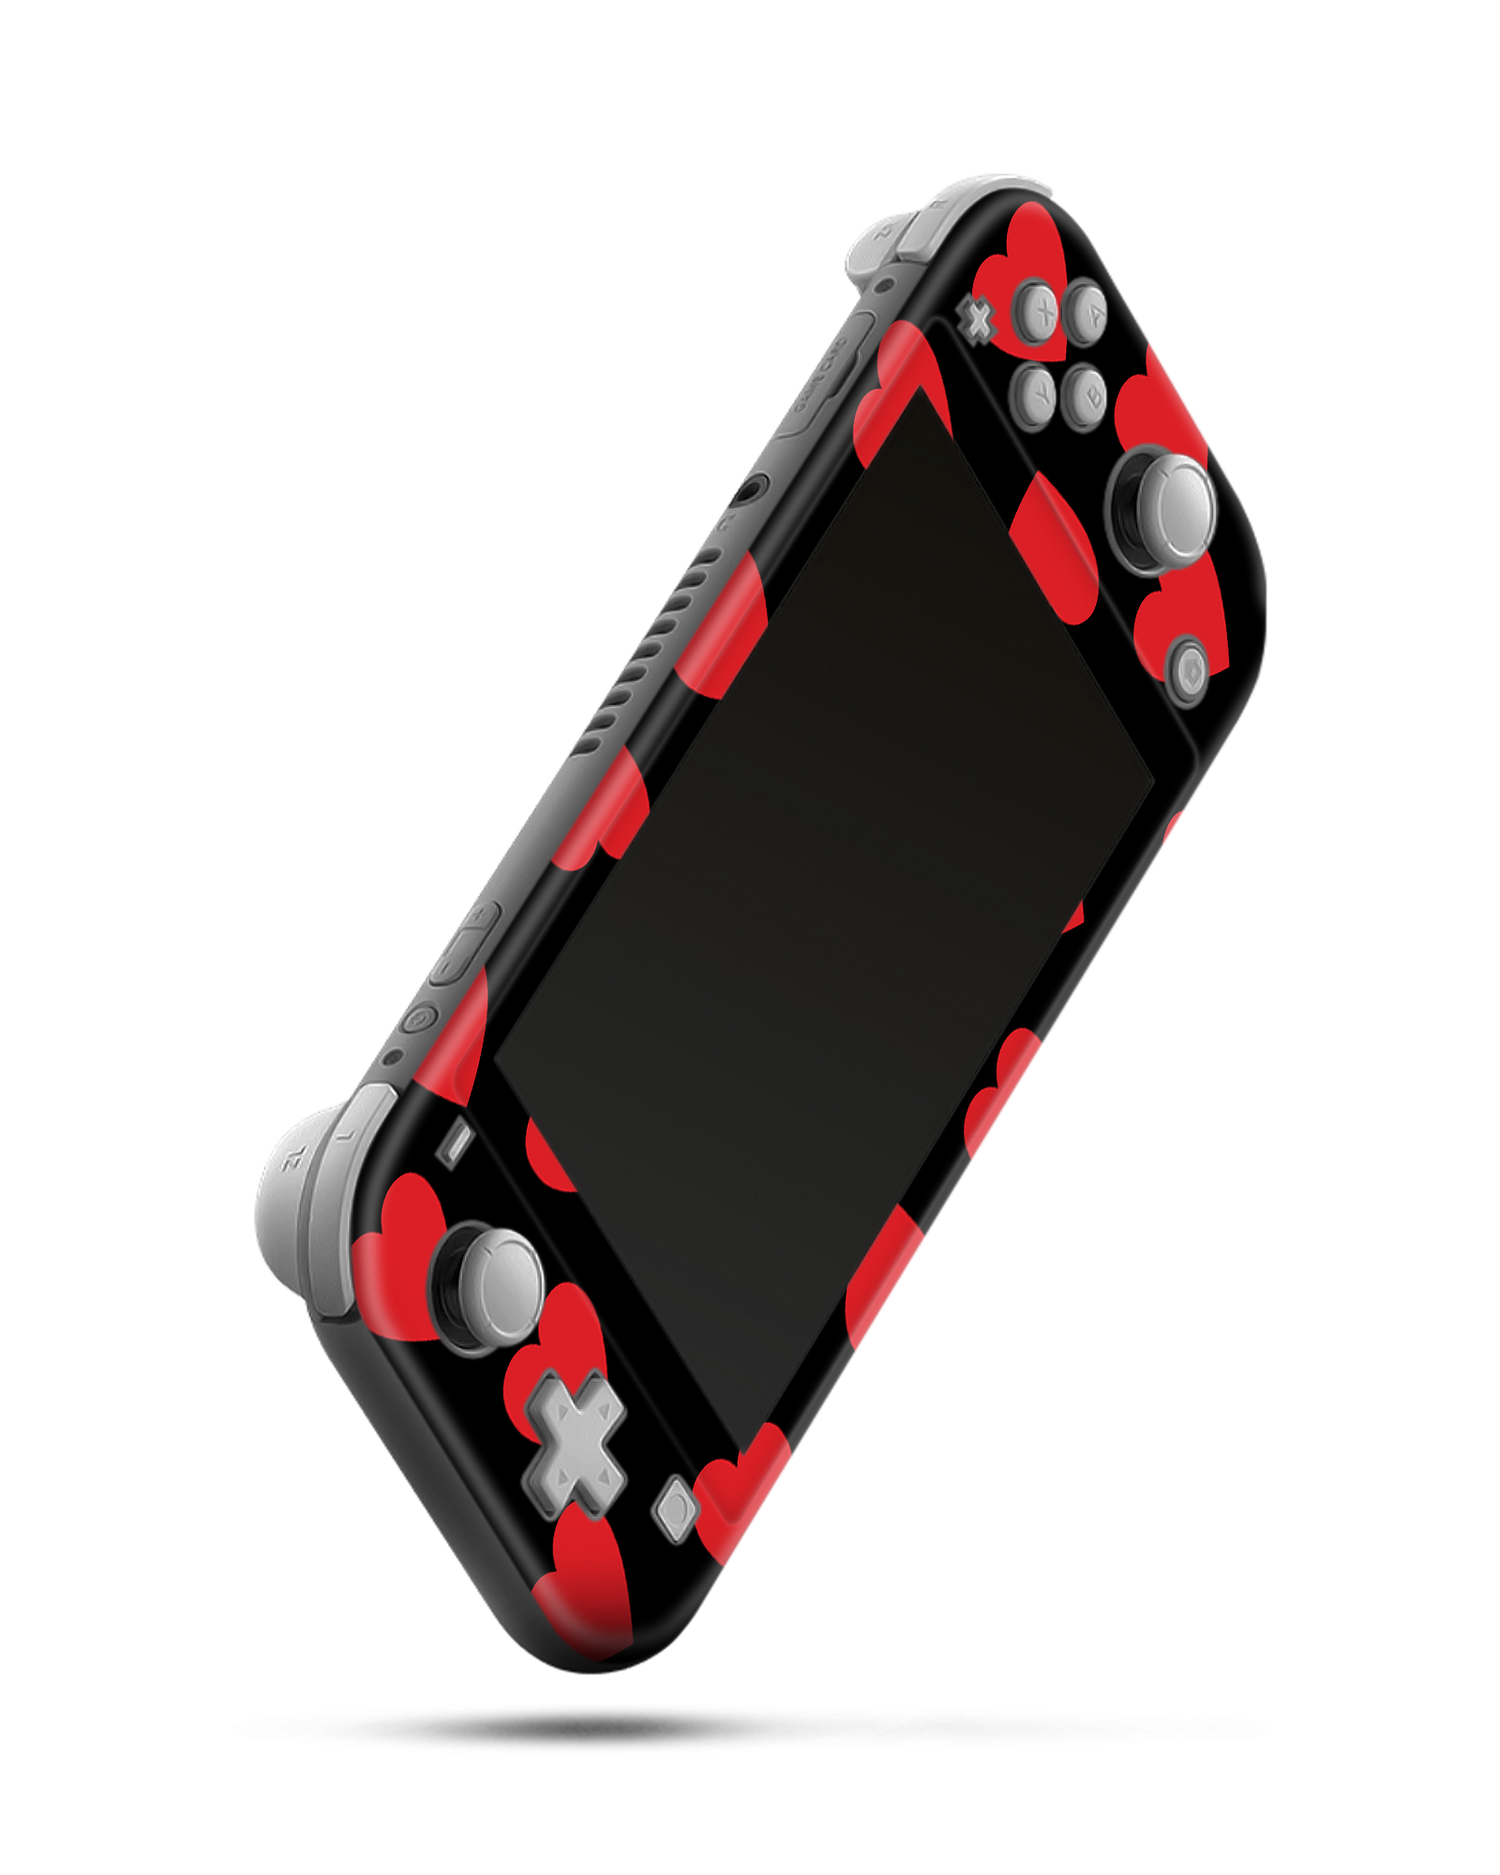 Repeating Hearts Console Skin for Nintendo Switch Lite: Side view